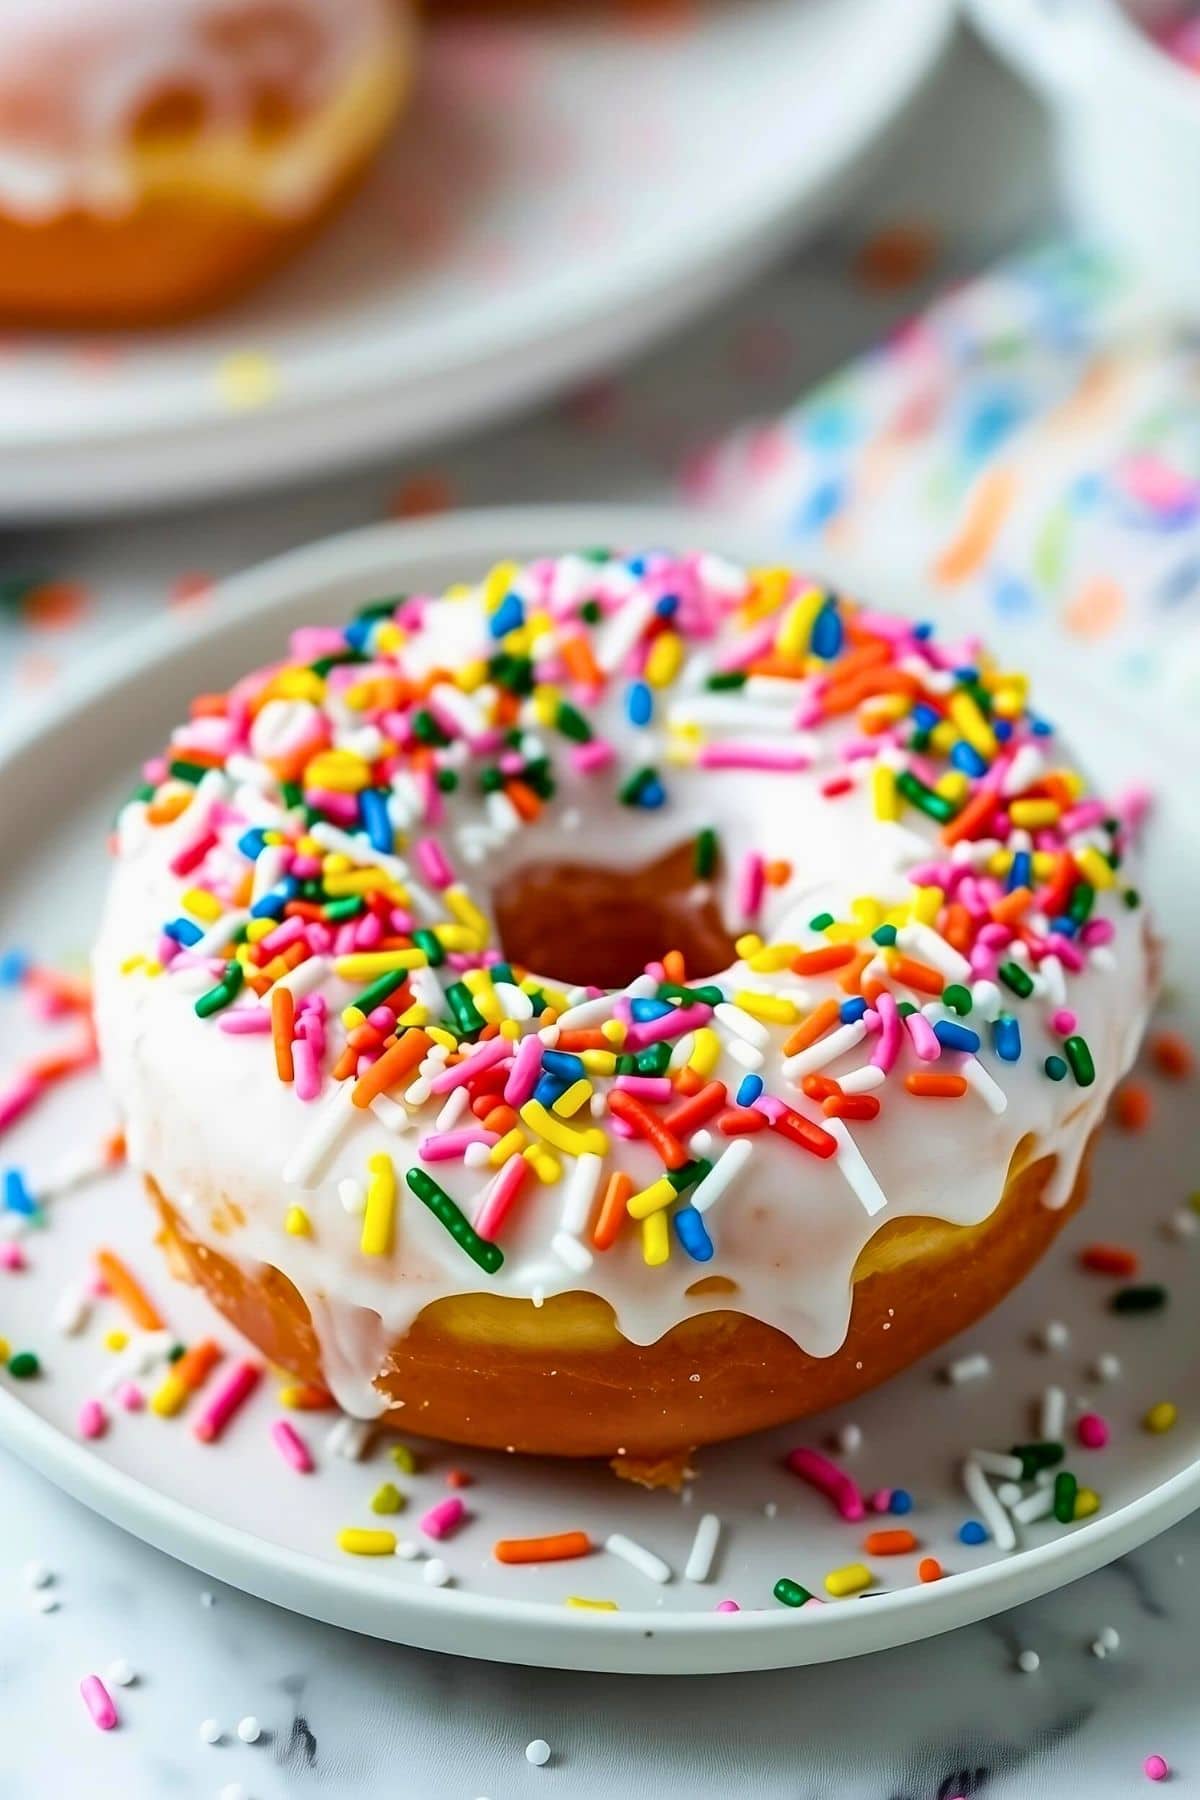 Donut with sugar glaze covered with colorful candy sprinkles served on a white plate.